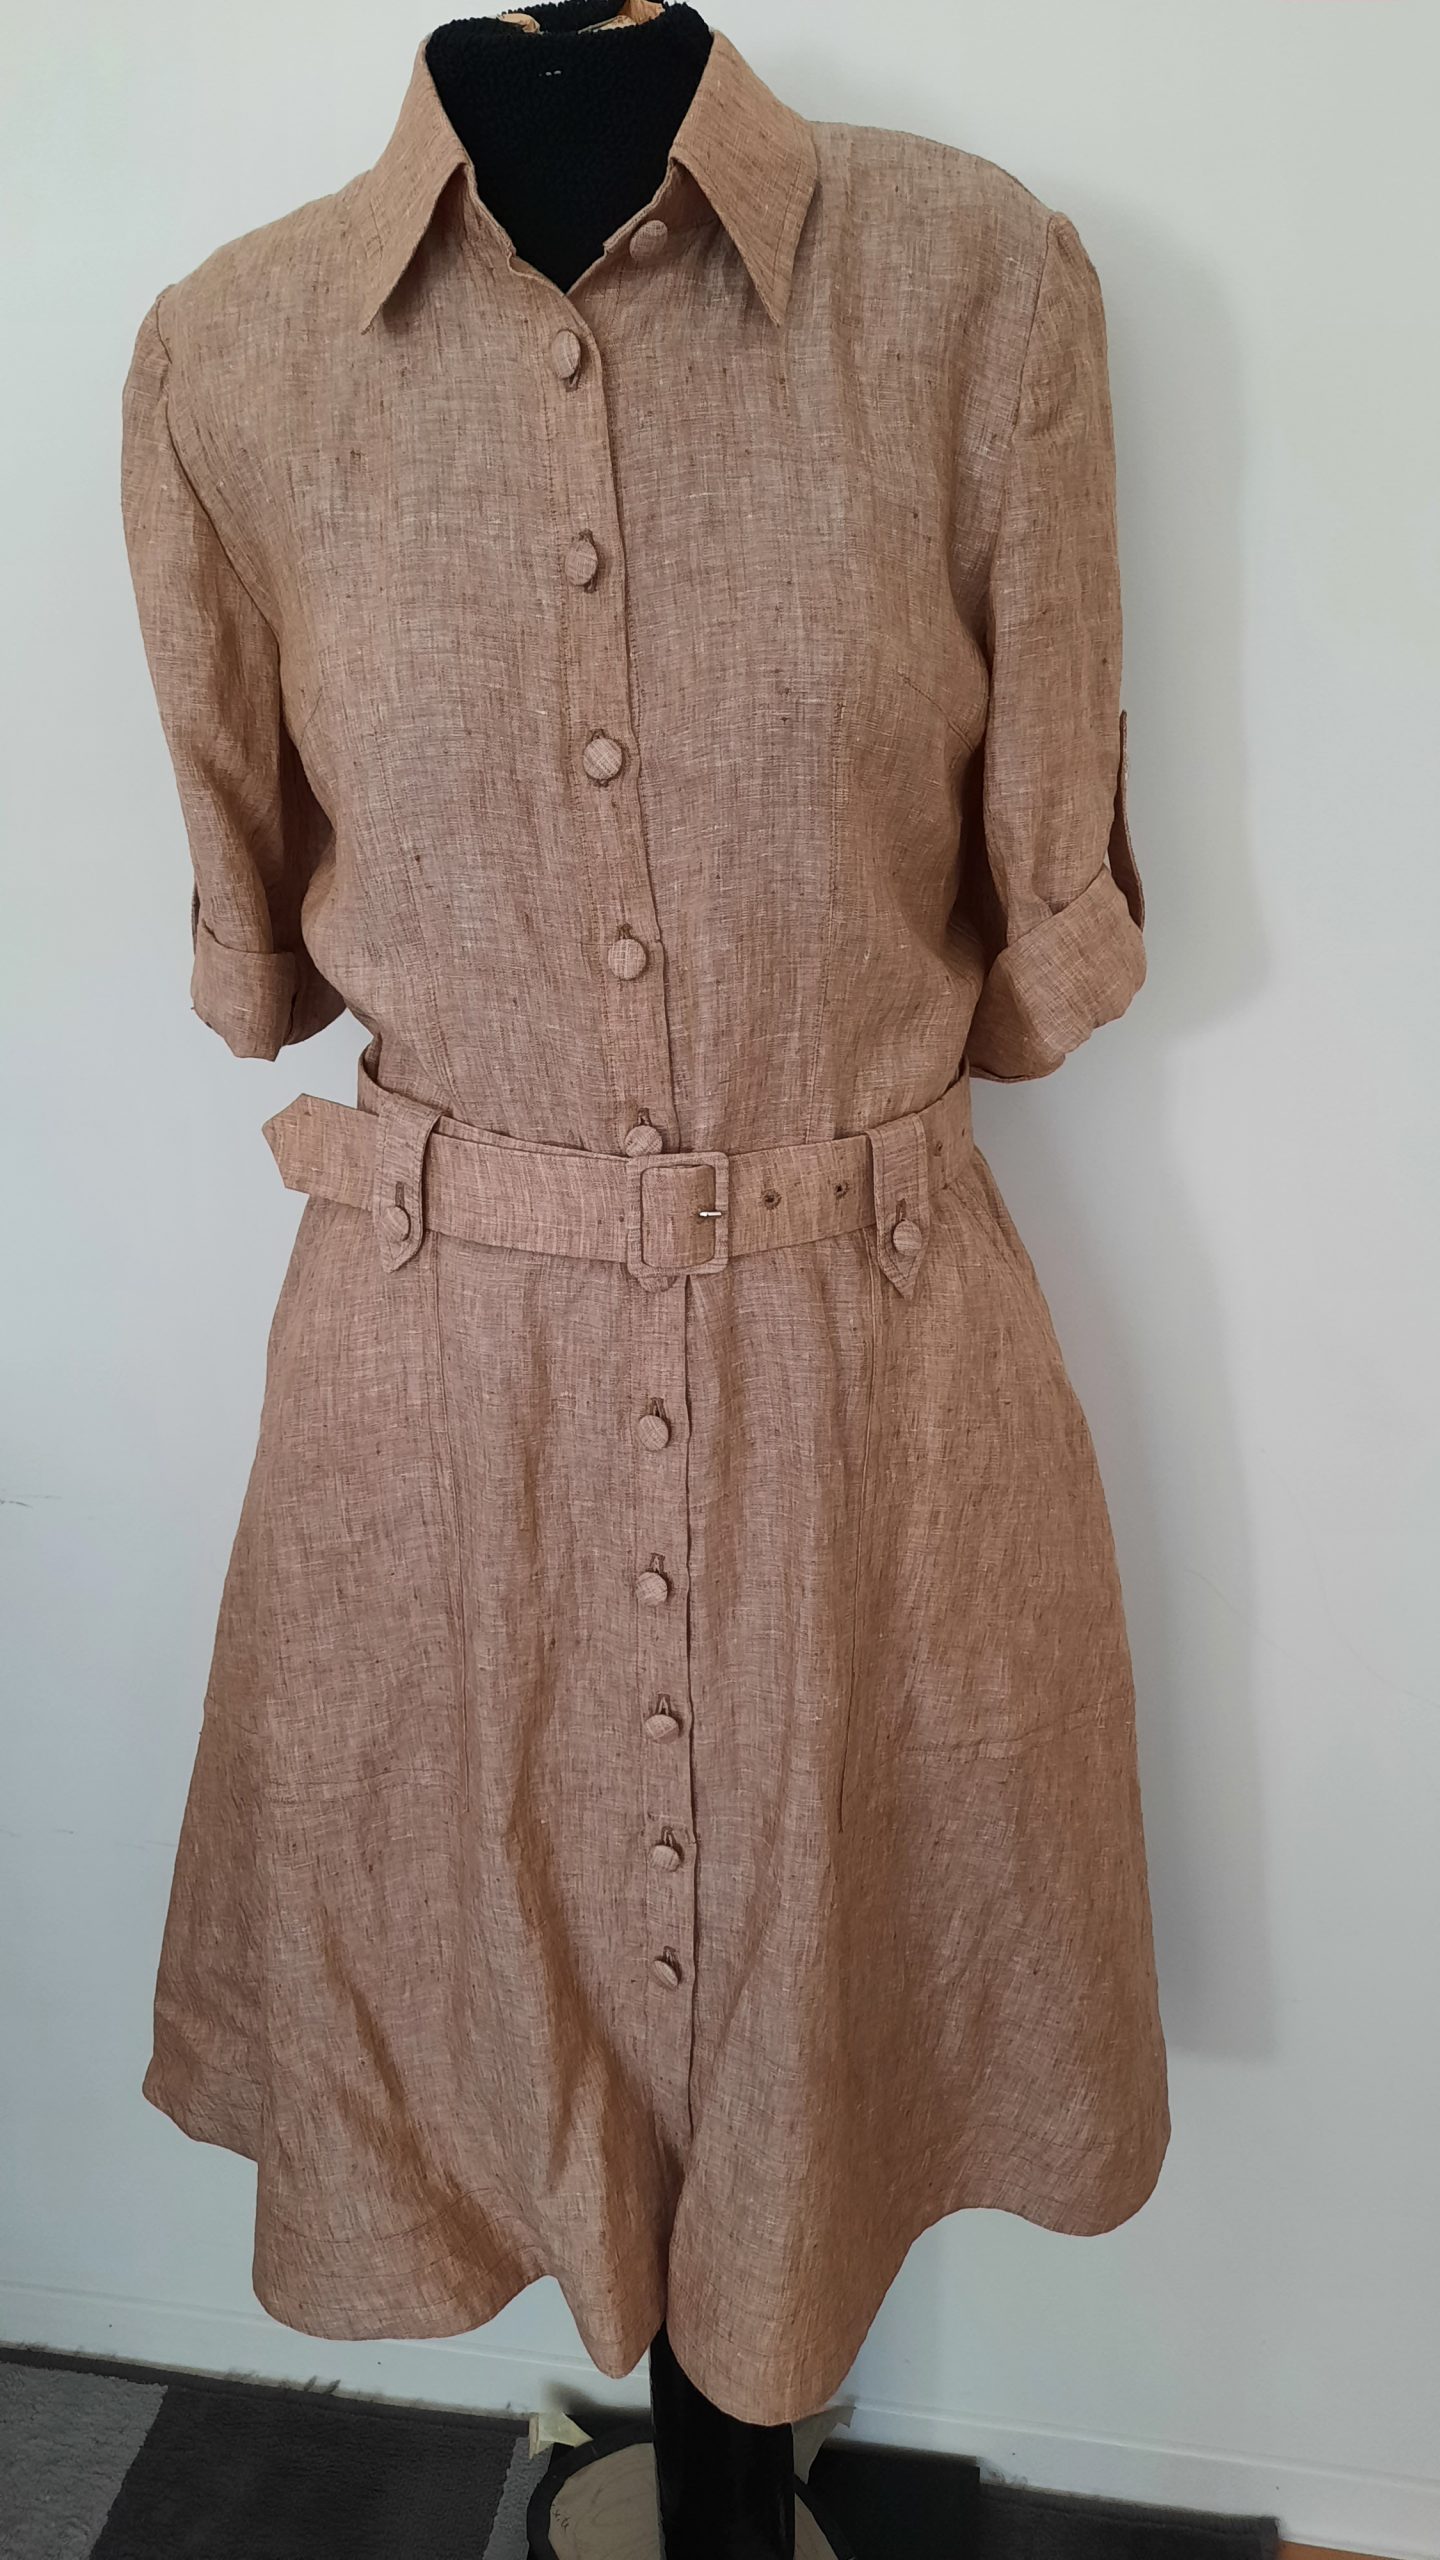 Shirtdress Marchionna Couture